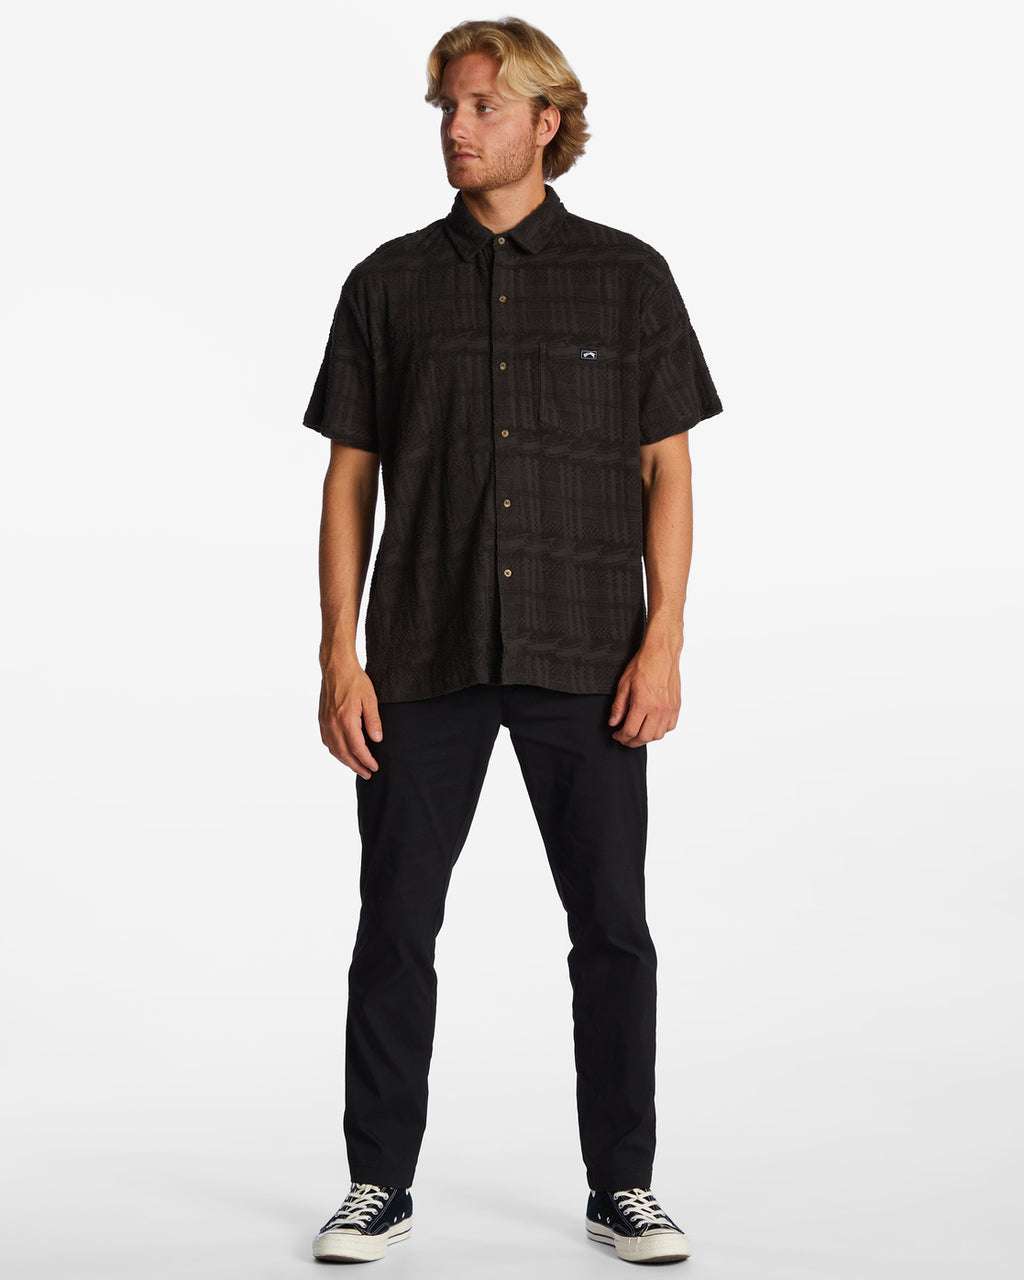 LOAFER BUTTON UP